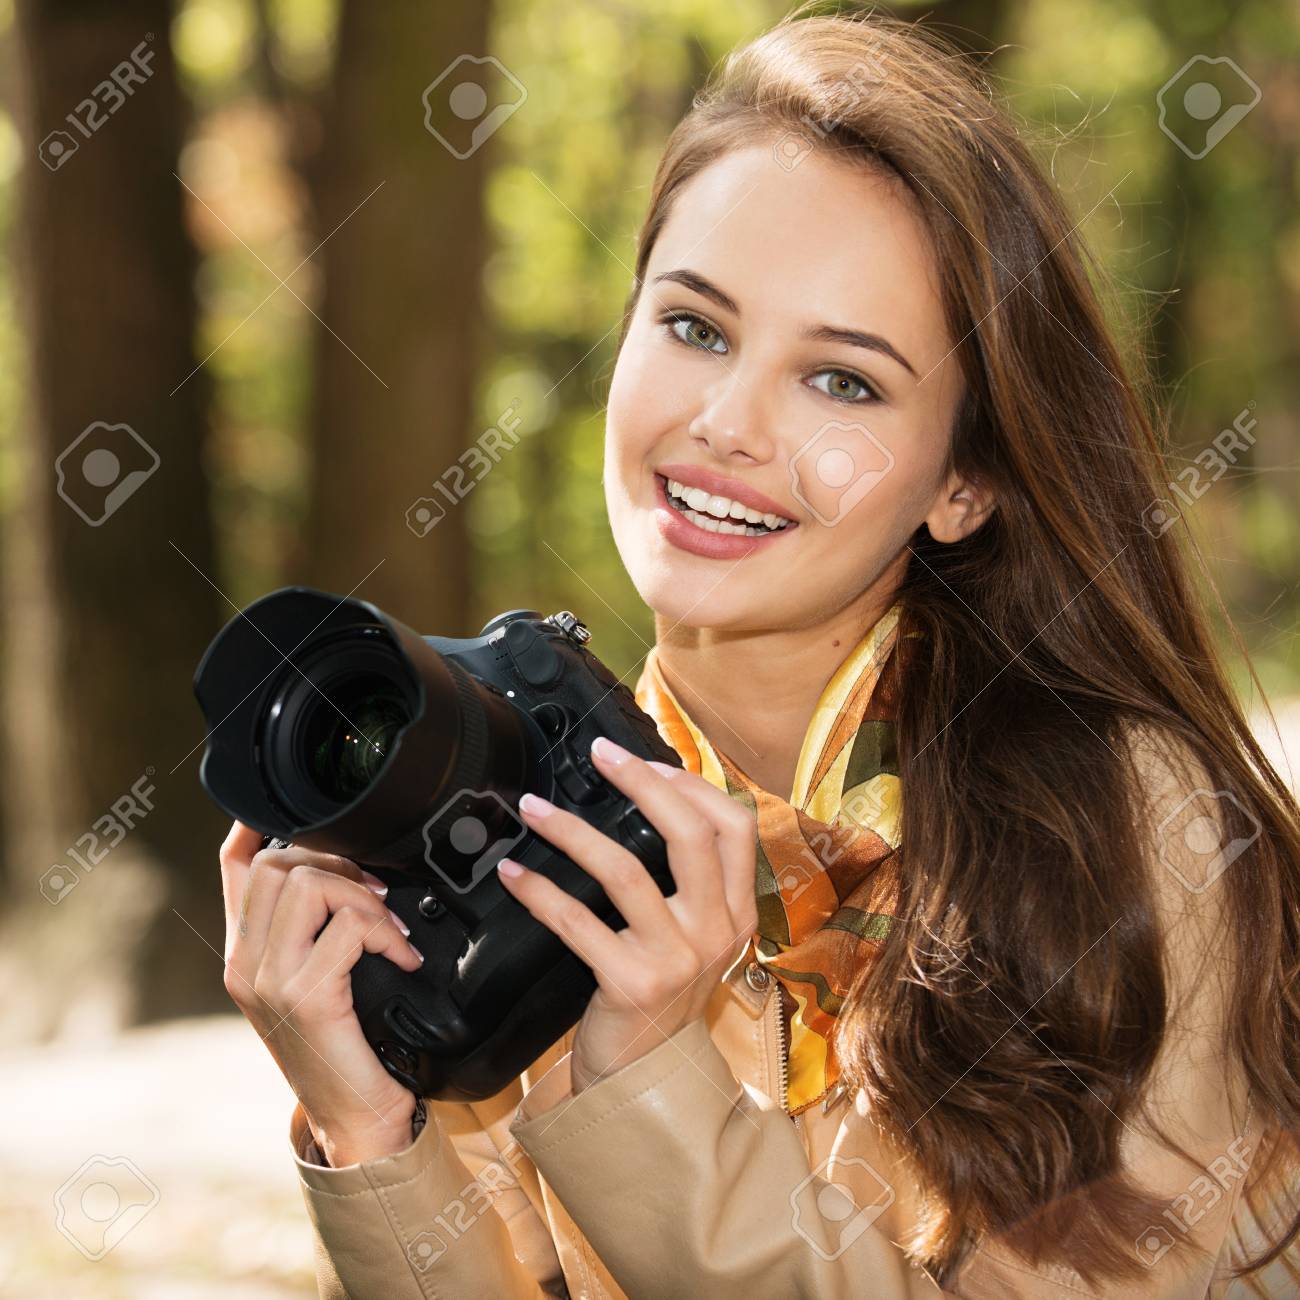 87499099-woman-is-a-professional-photographer-with-photo-camera-outdoor-young-girl-taking-photo-outdoors-with.jpg